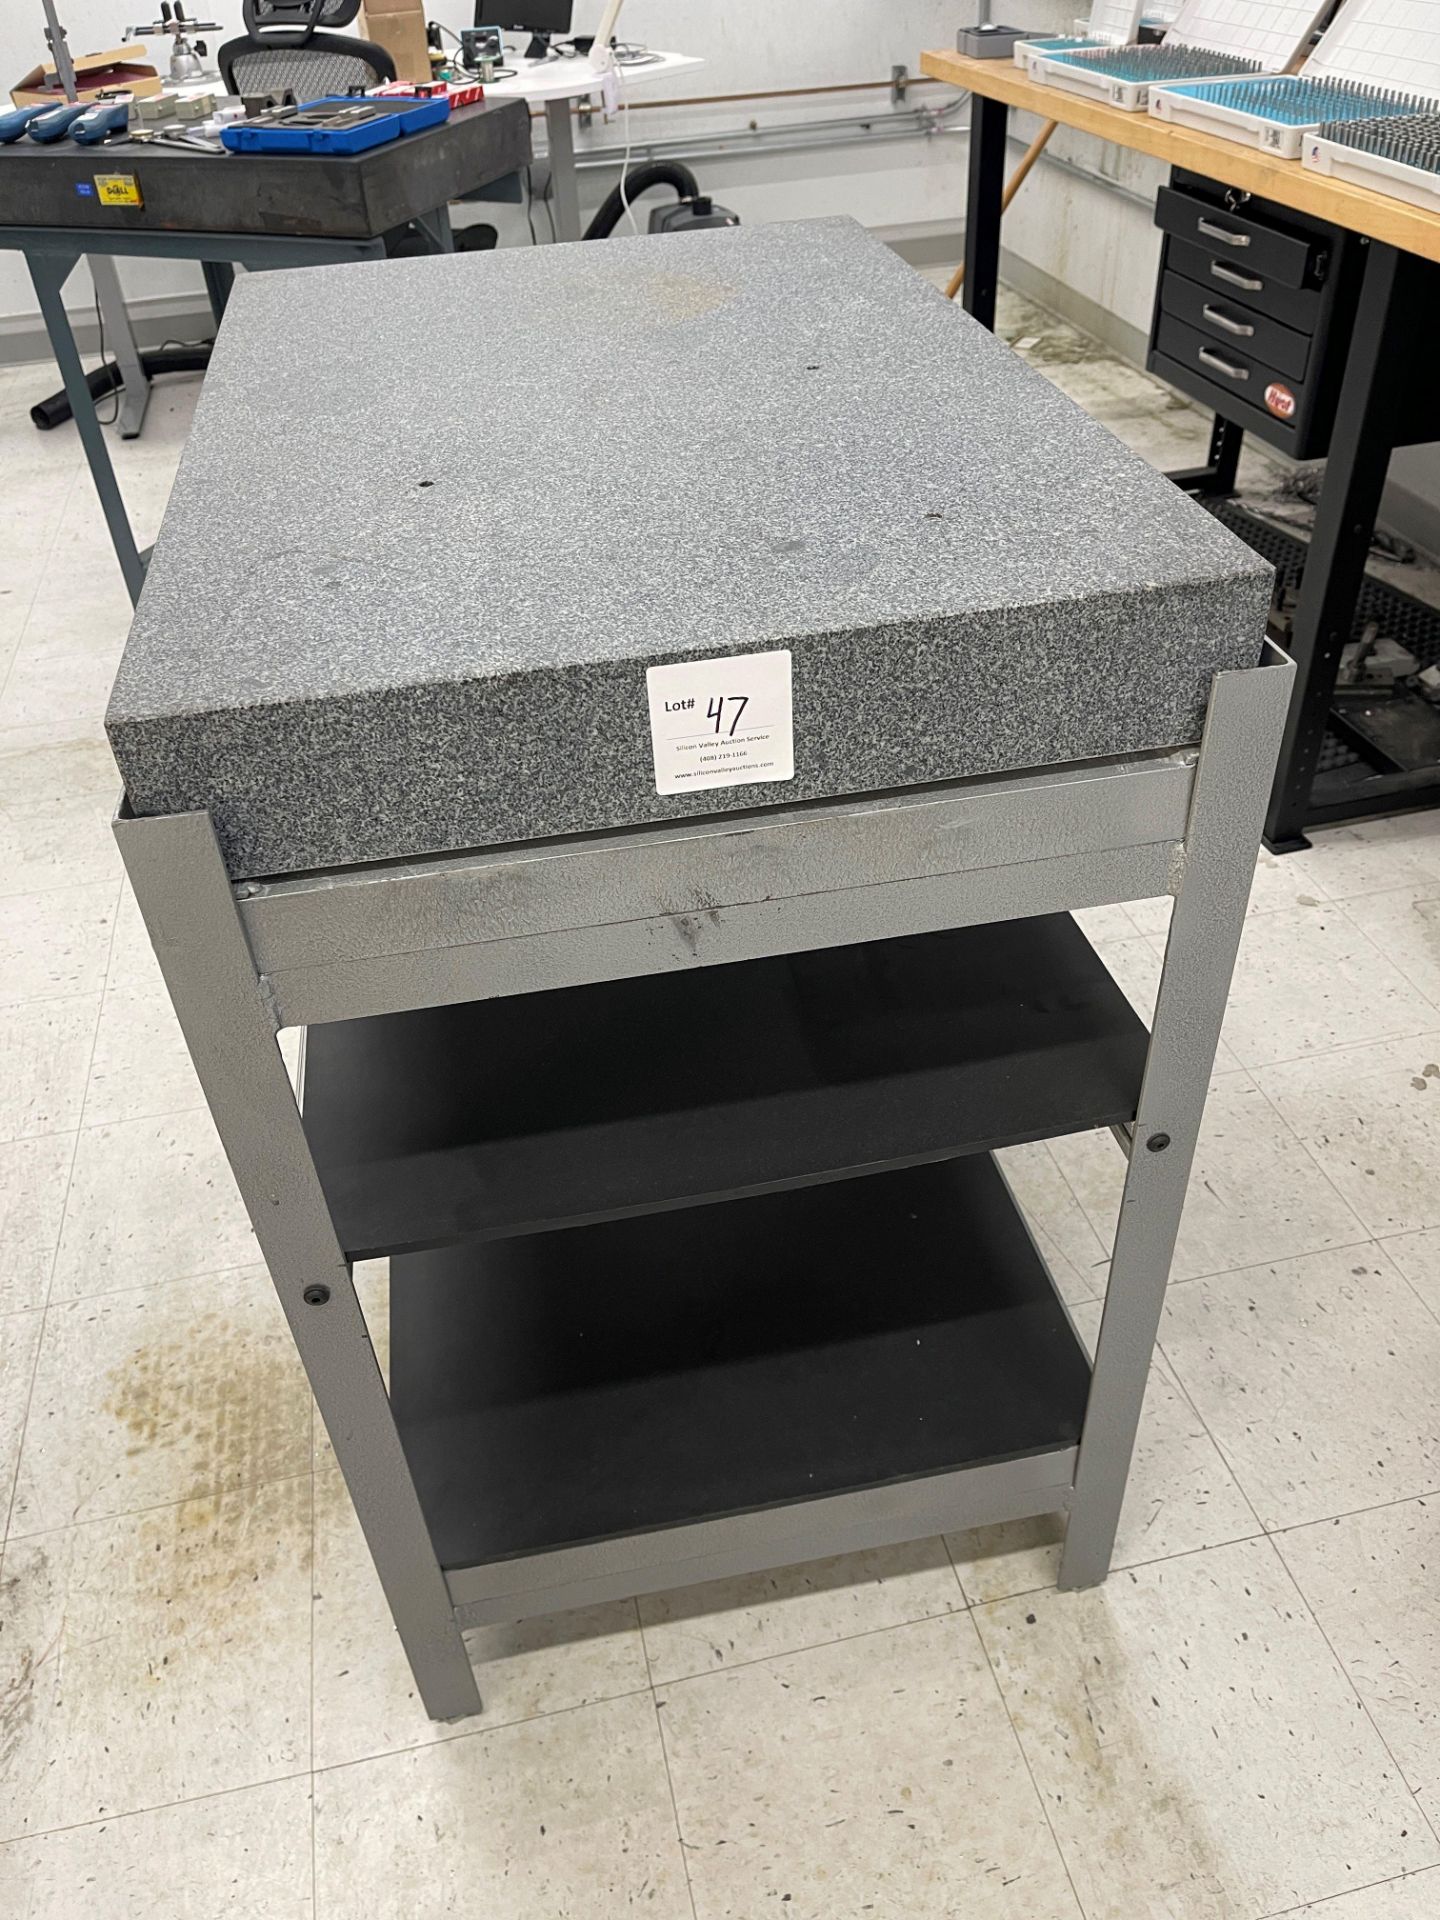 Granite Surface Plate on metal stand with two shelves 36" wide x 24" deep x 40" high